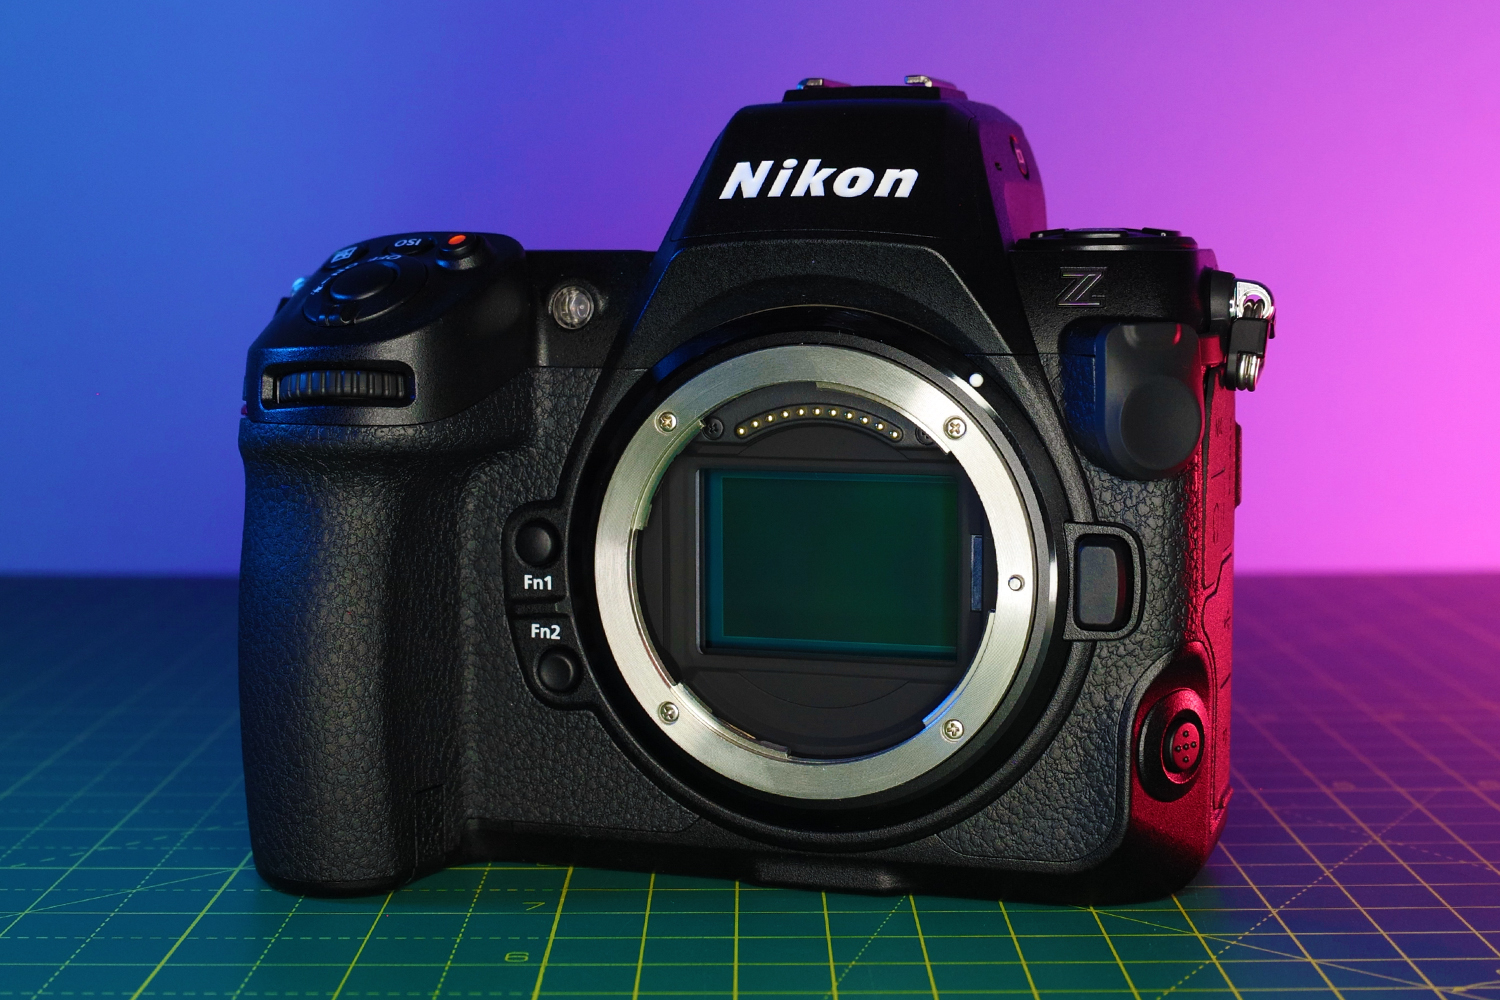 NIKON Z8 | SMALLER, LIGHTER AND CHEAPER, BUT JUST AS GOOD!